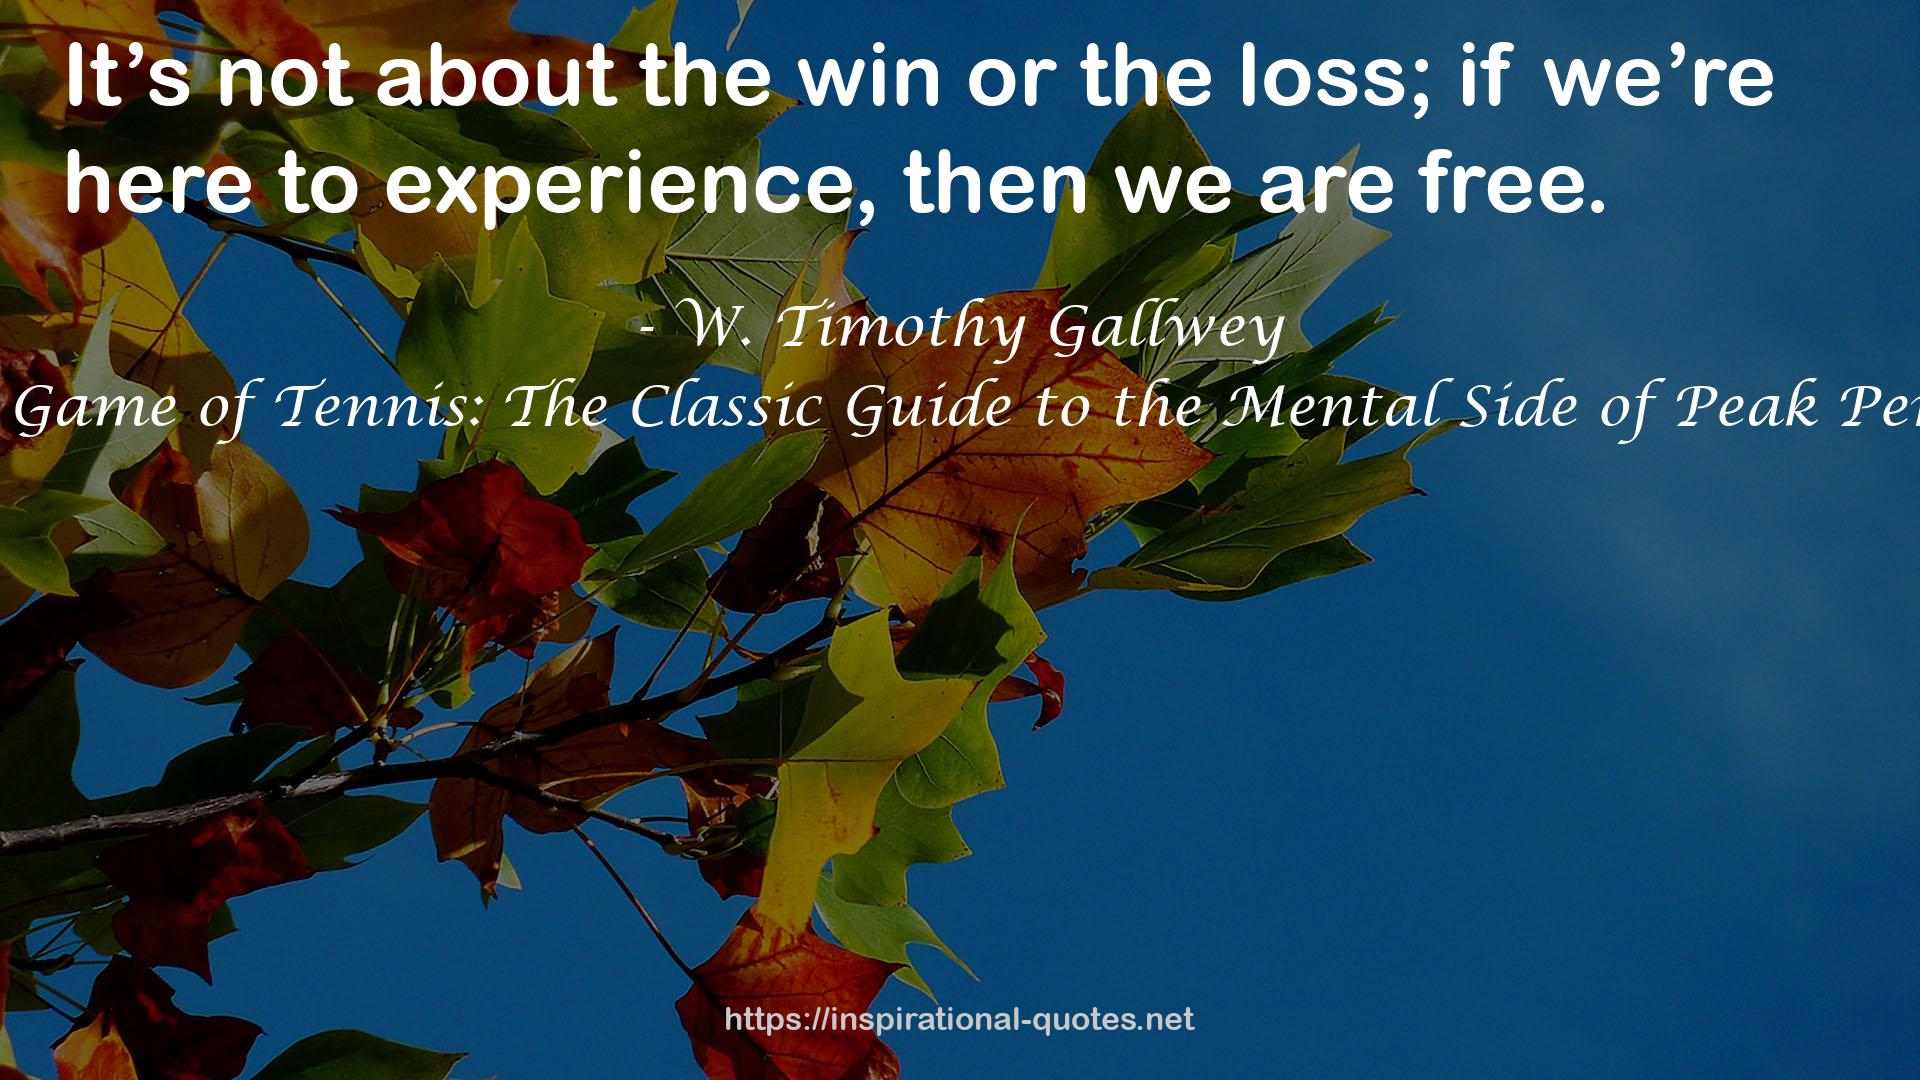 The Inner Game of Tennis: The Classic Guide to the Mental Side of Peak Performance QUOTES